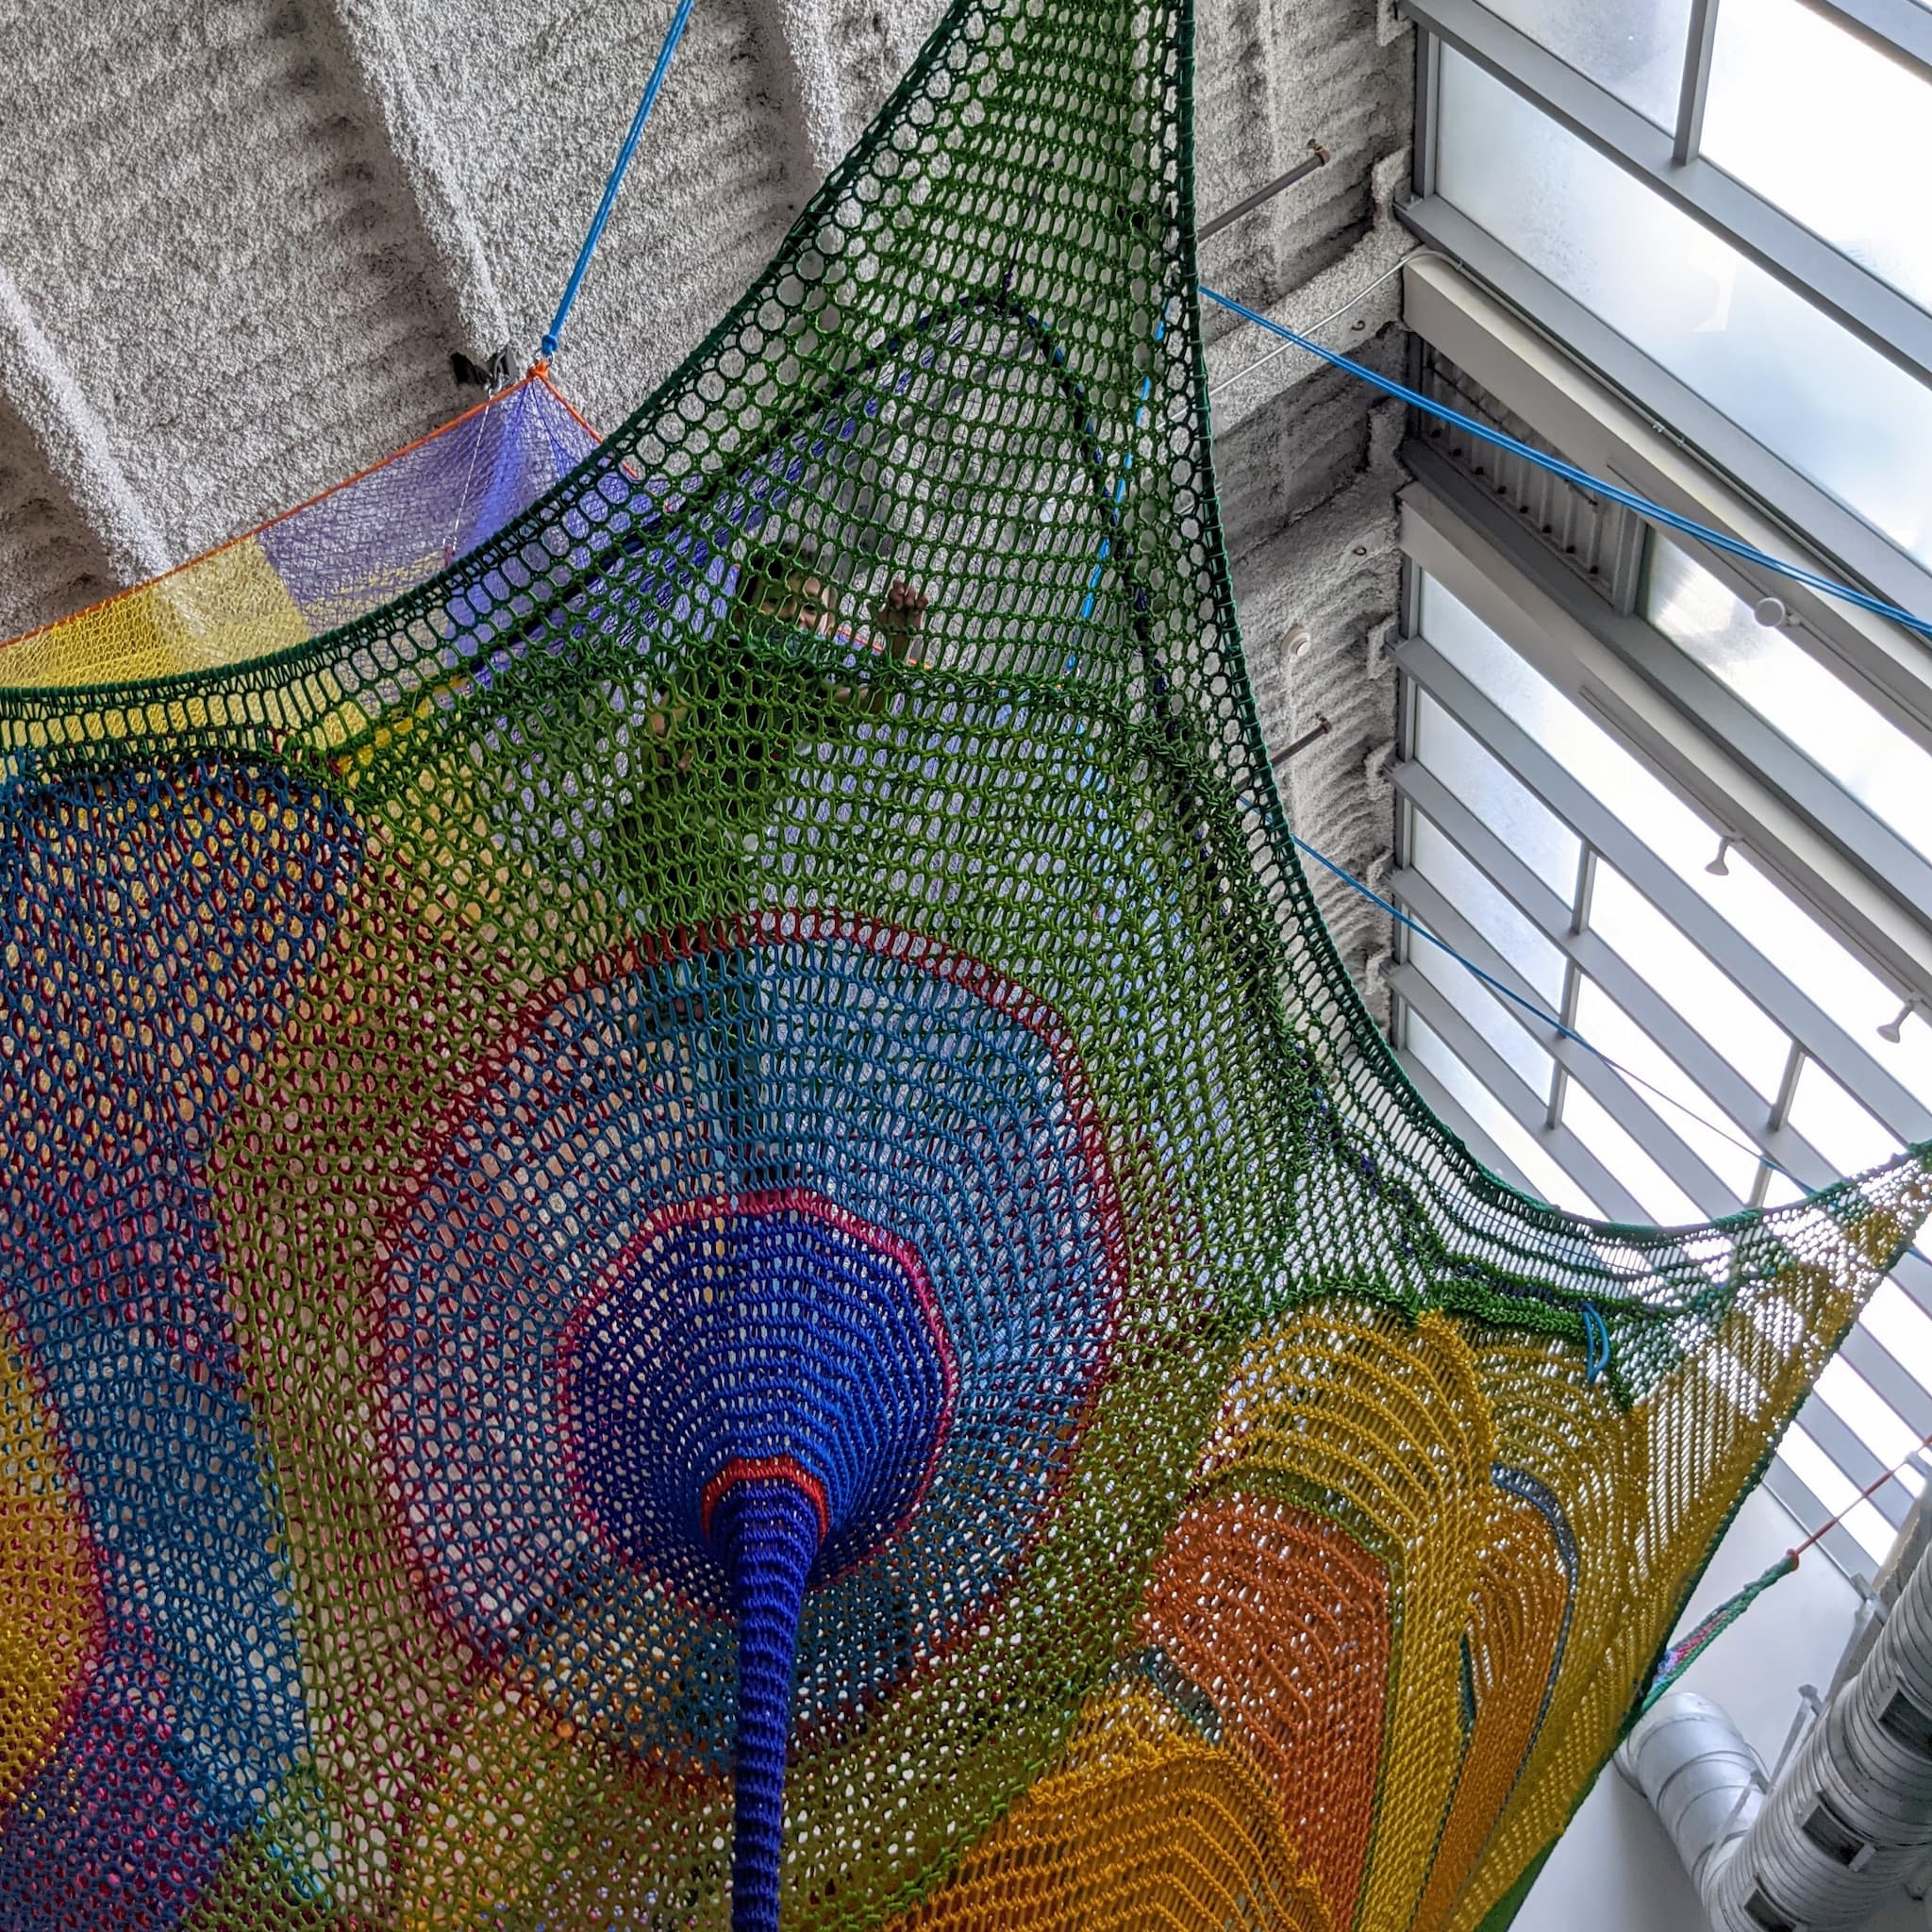 Boy climbing in colorful netting.